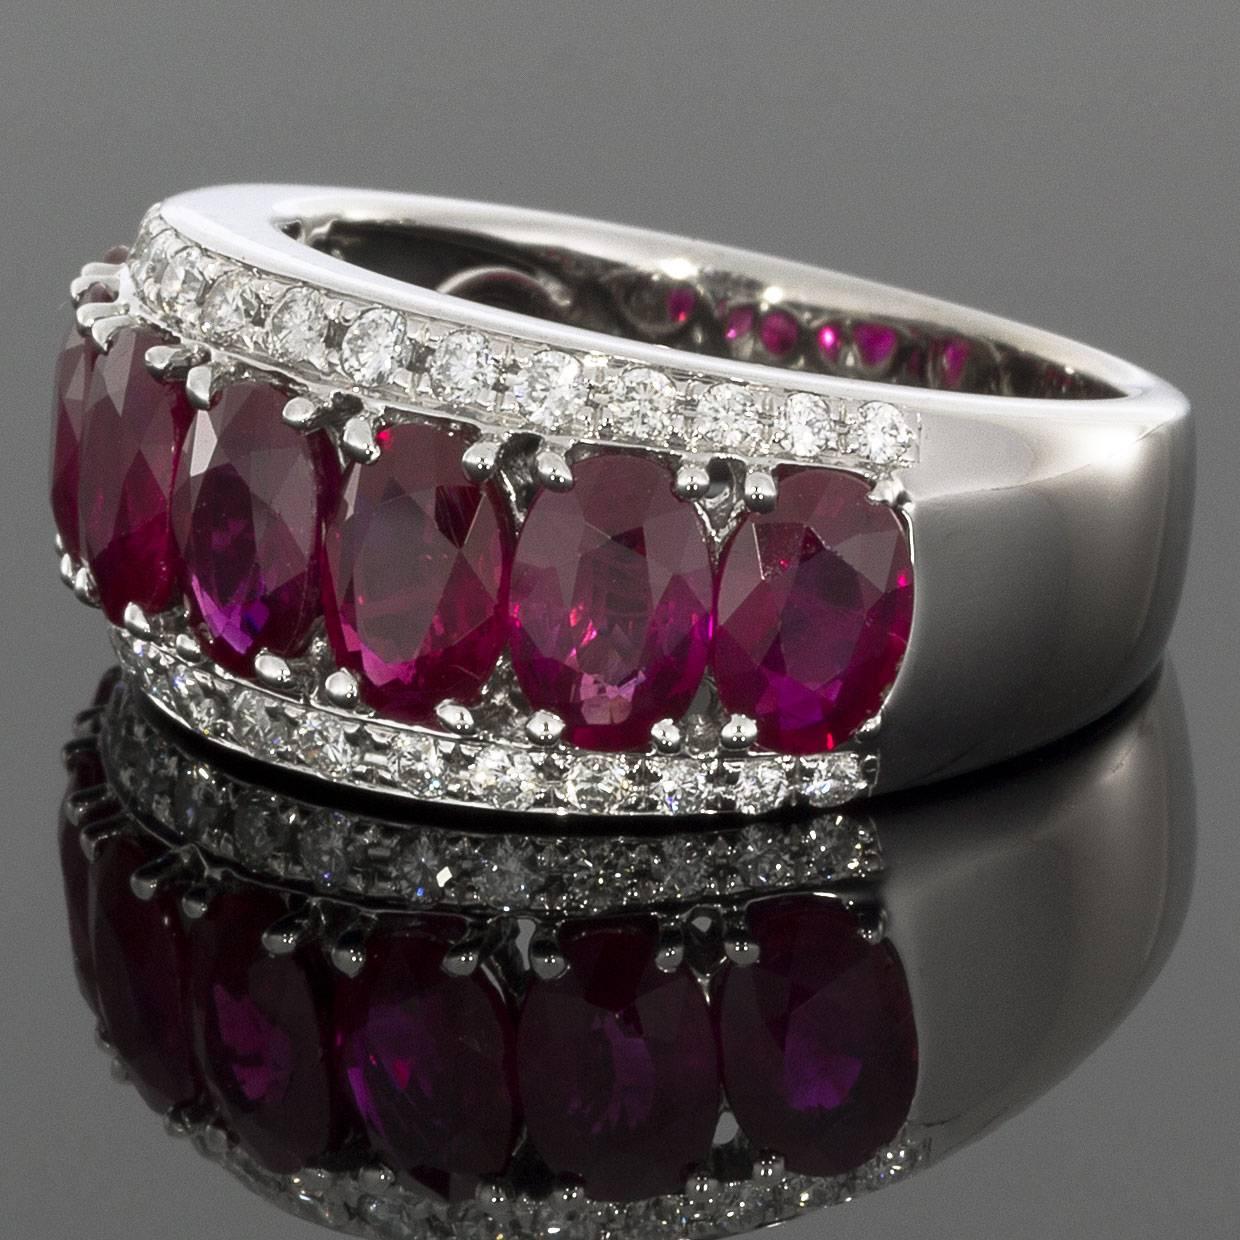 This beautiful 18K white gold ruby and diamond ring features 7 oval rubies and 30 round white accent diamonds that are prong set. The ring is a size 6.75 and GGL certified. Your new ring will surely impress anyone who sees it. MSRP